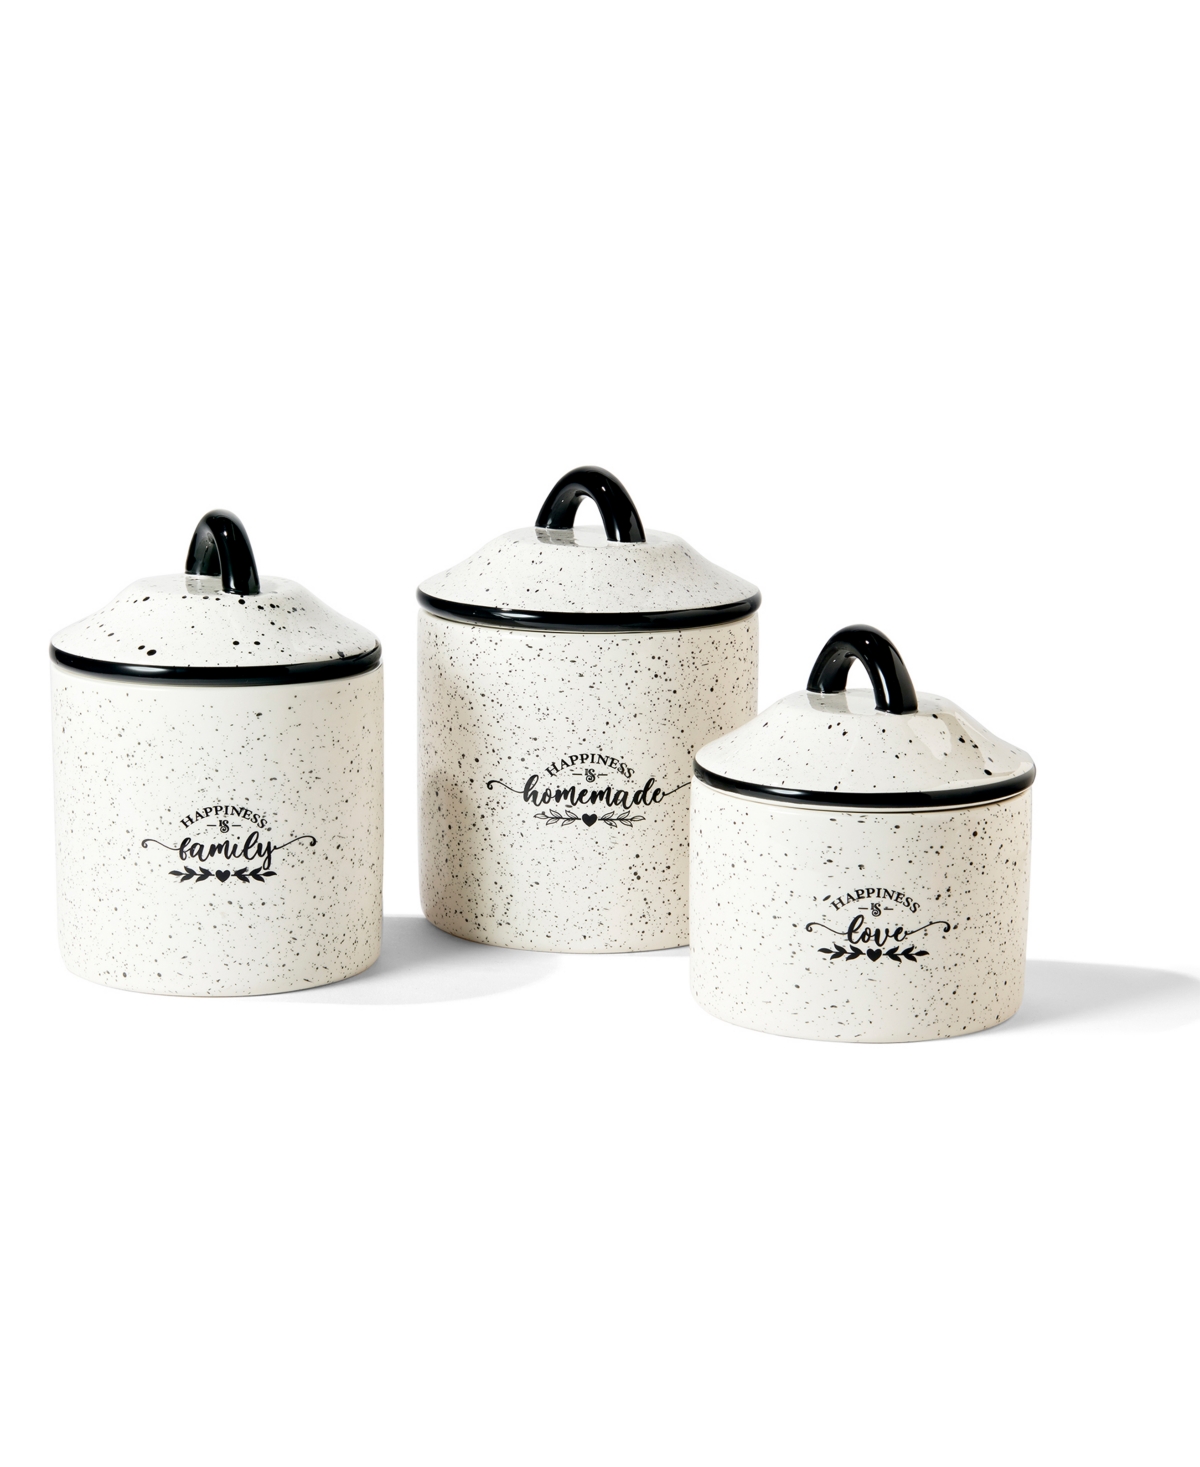 Jay Imports Home Made Happiness 3 Piece Canister Set In White